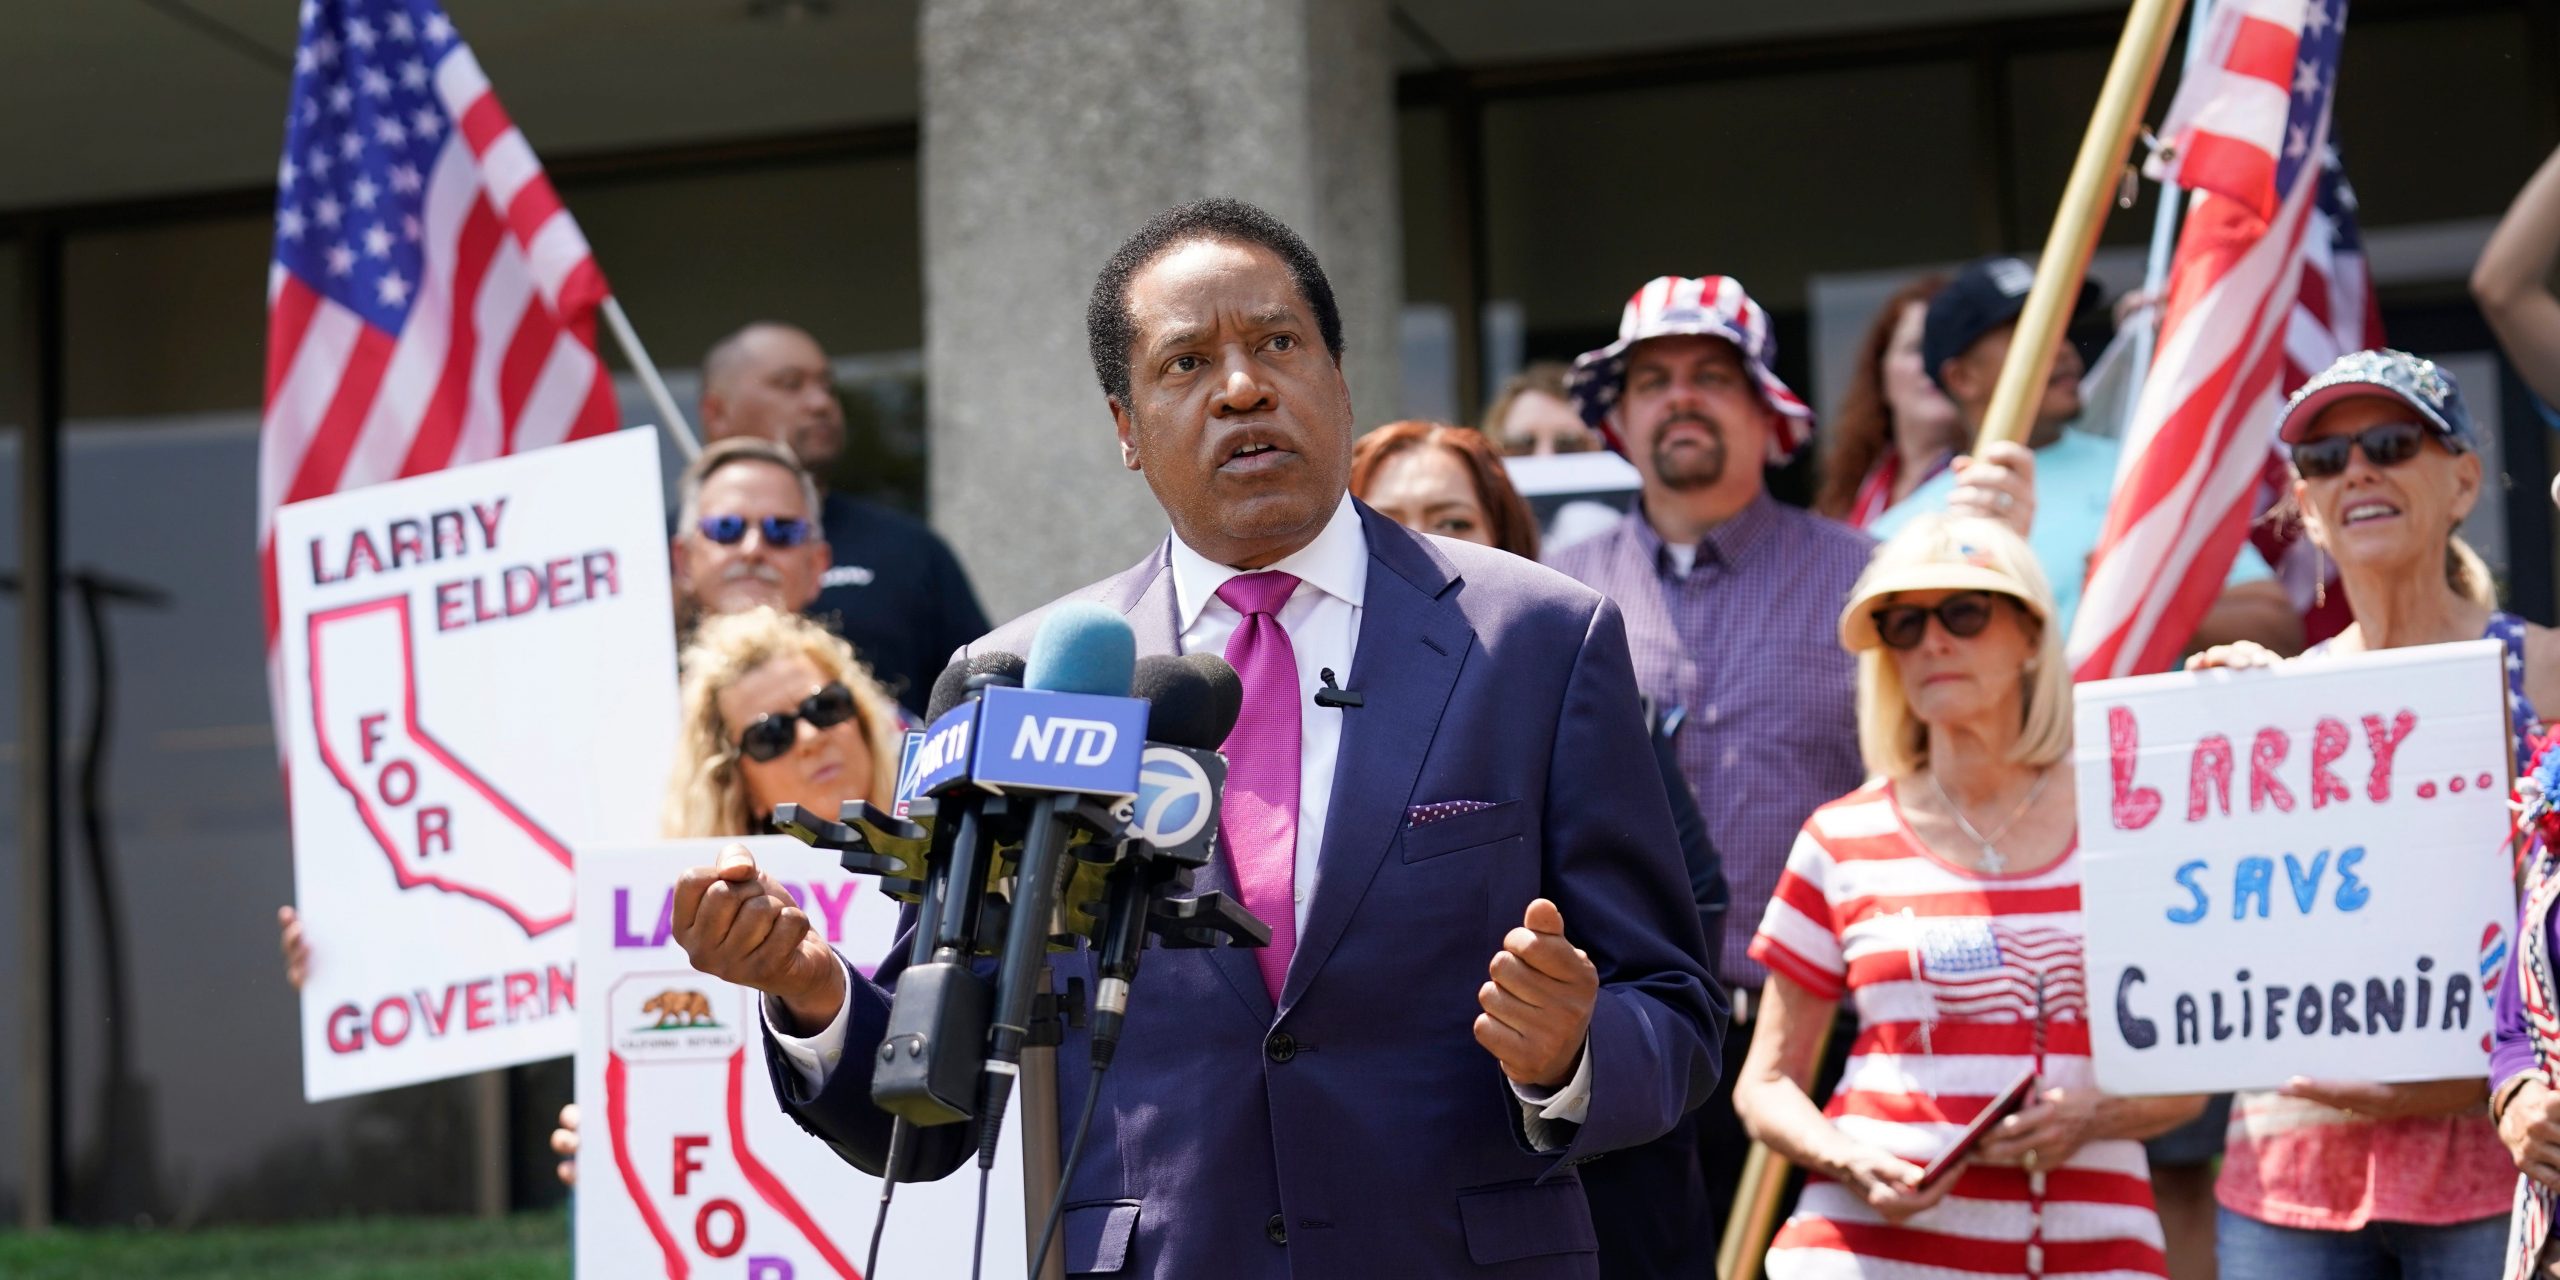 In this July 13, 2021 file photo radio talk show host Larry Elder speaks to supporters during a campaign stop in Norwalk, Calif.